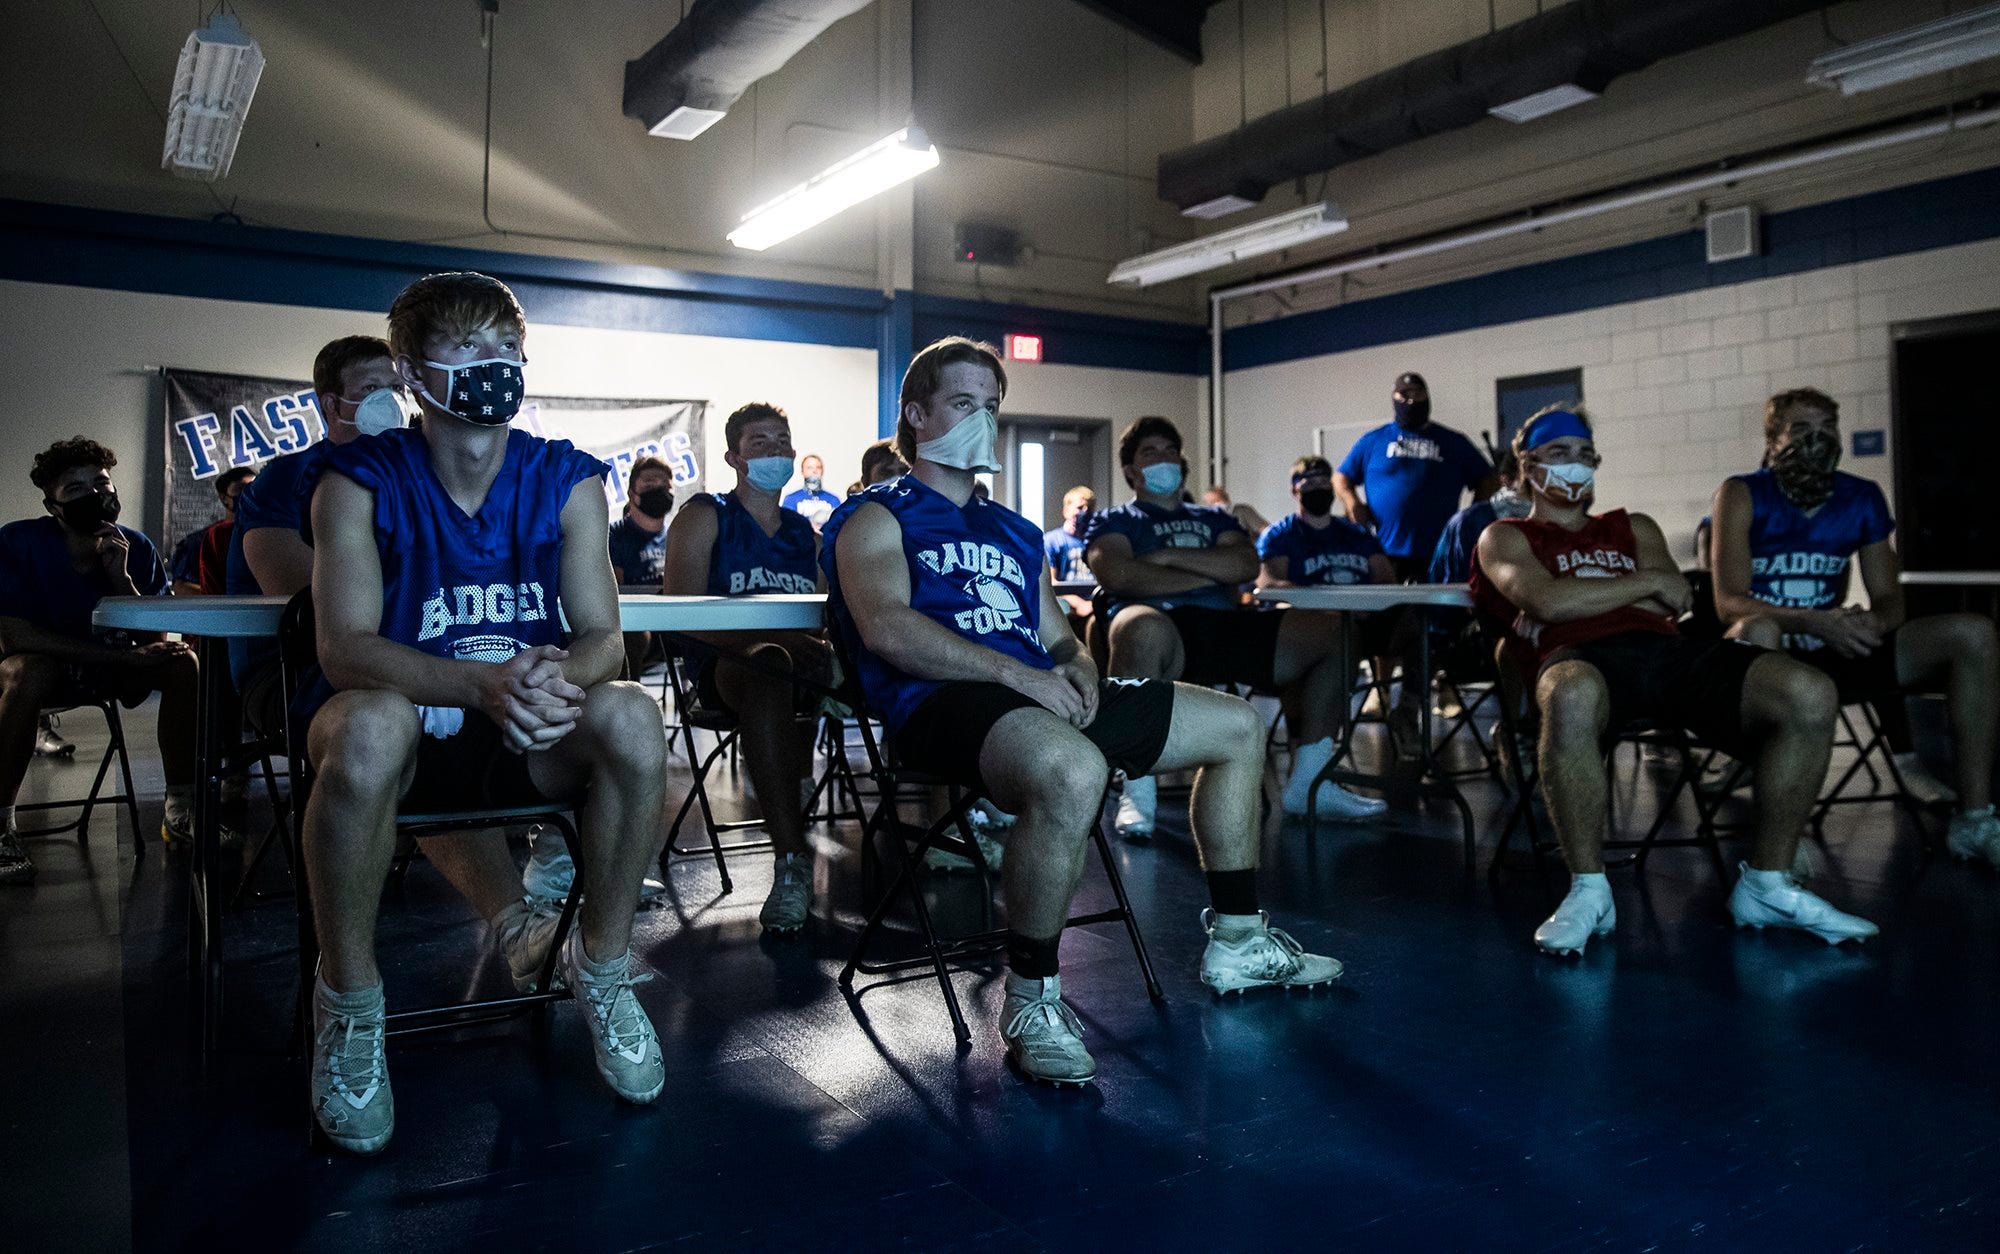 Lampasas  High School football started their practice on Monday, August 3, 2020, by watching film and running drills on their campus as they prepare for the football season during COVID-19.